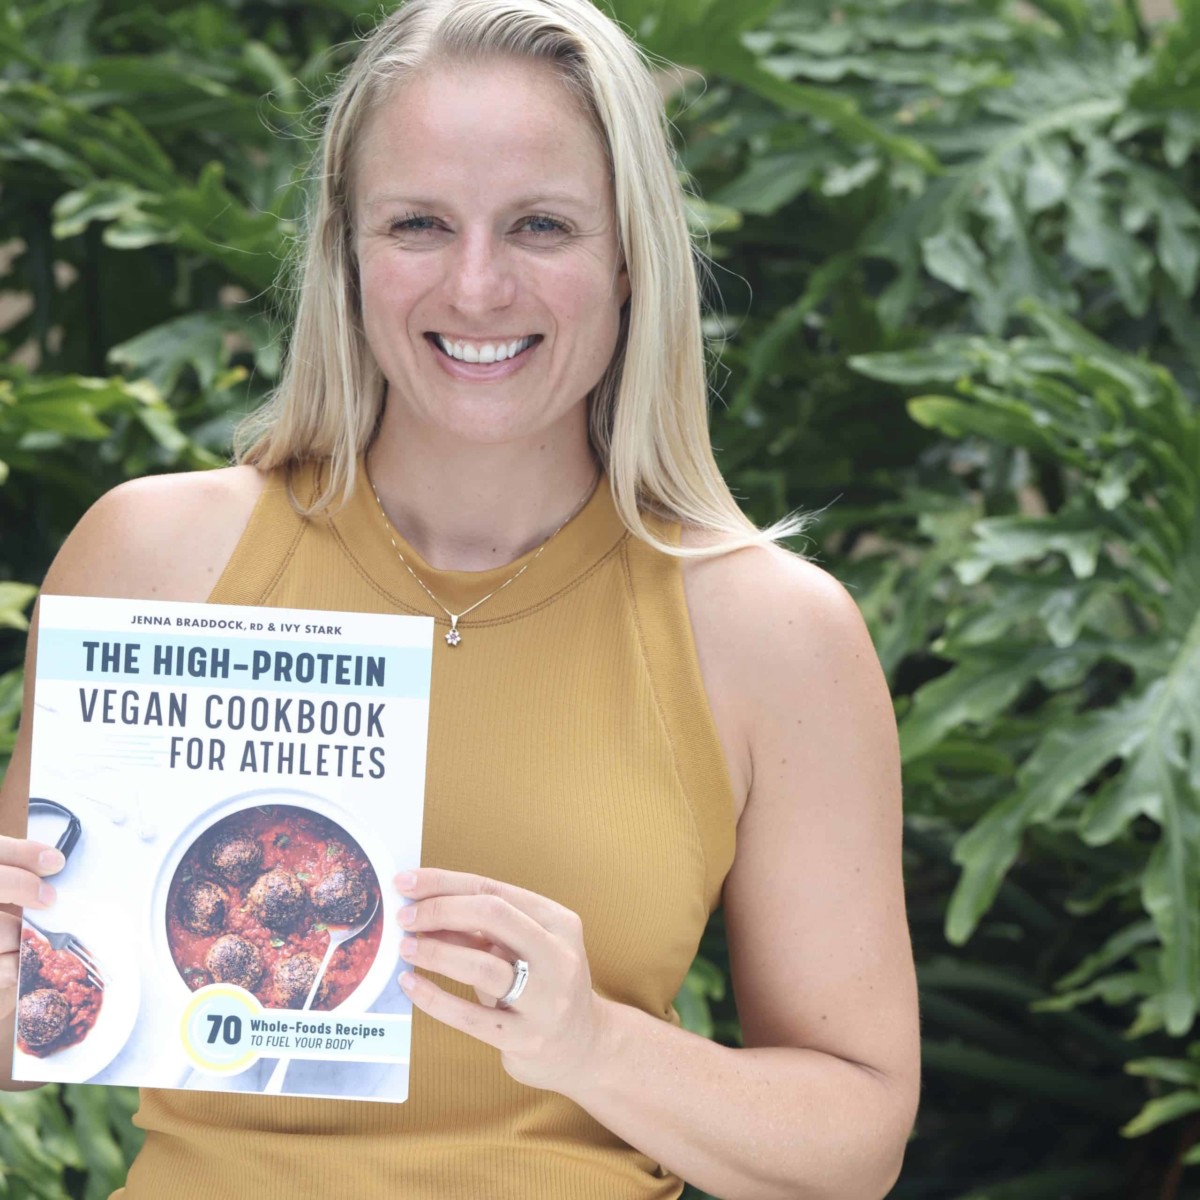 Jenna holding her cookbook The High-Protein Vegan Cookbook for Athletes